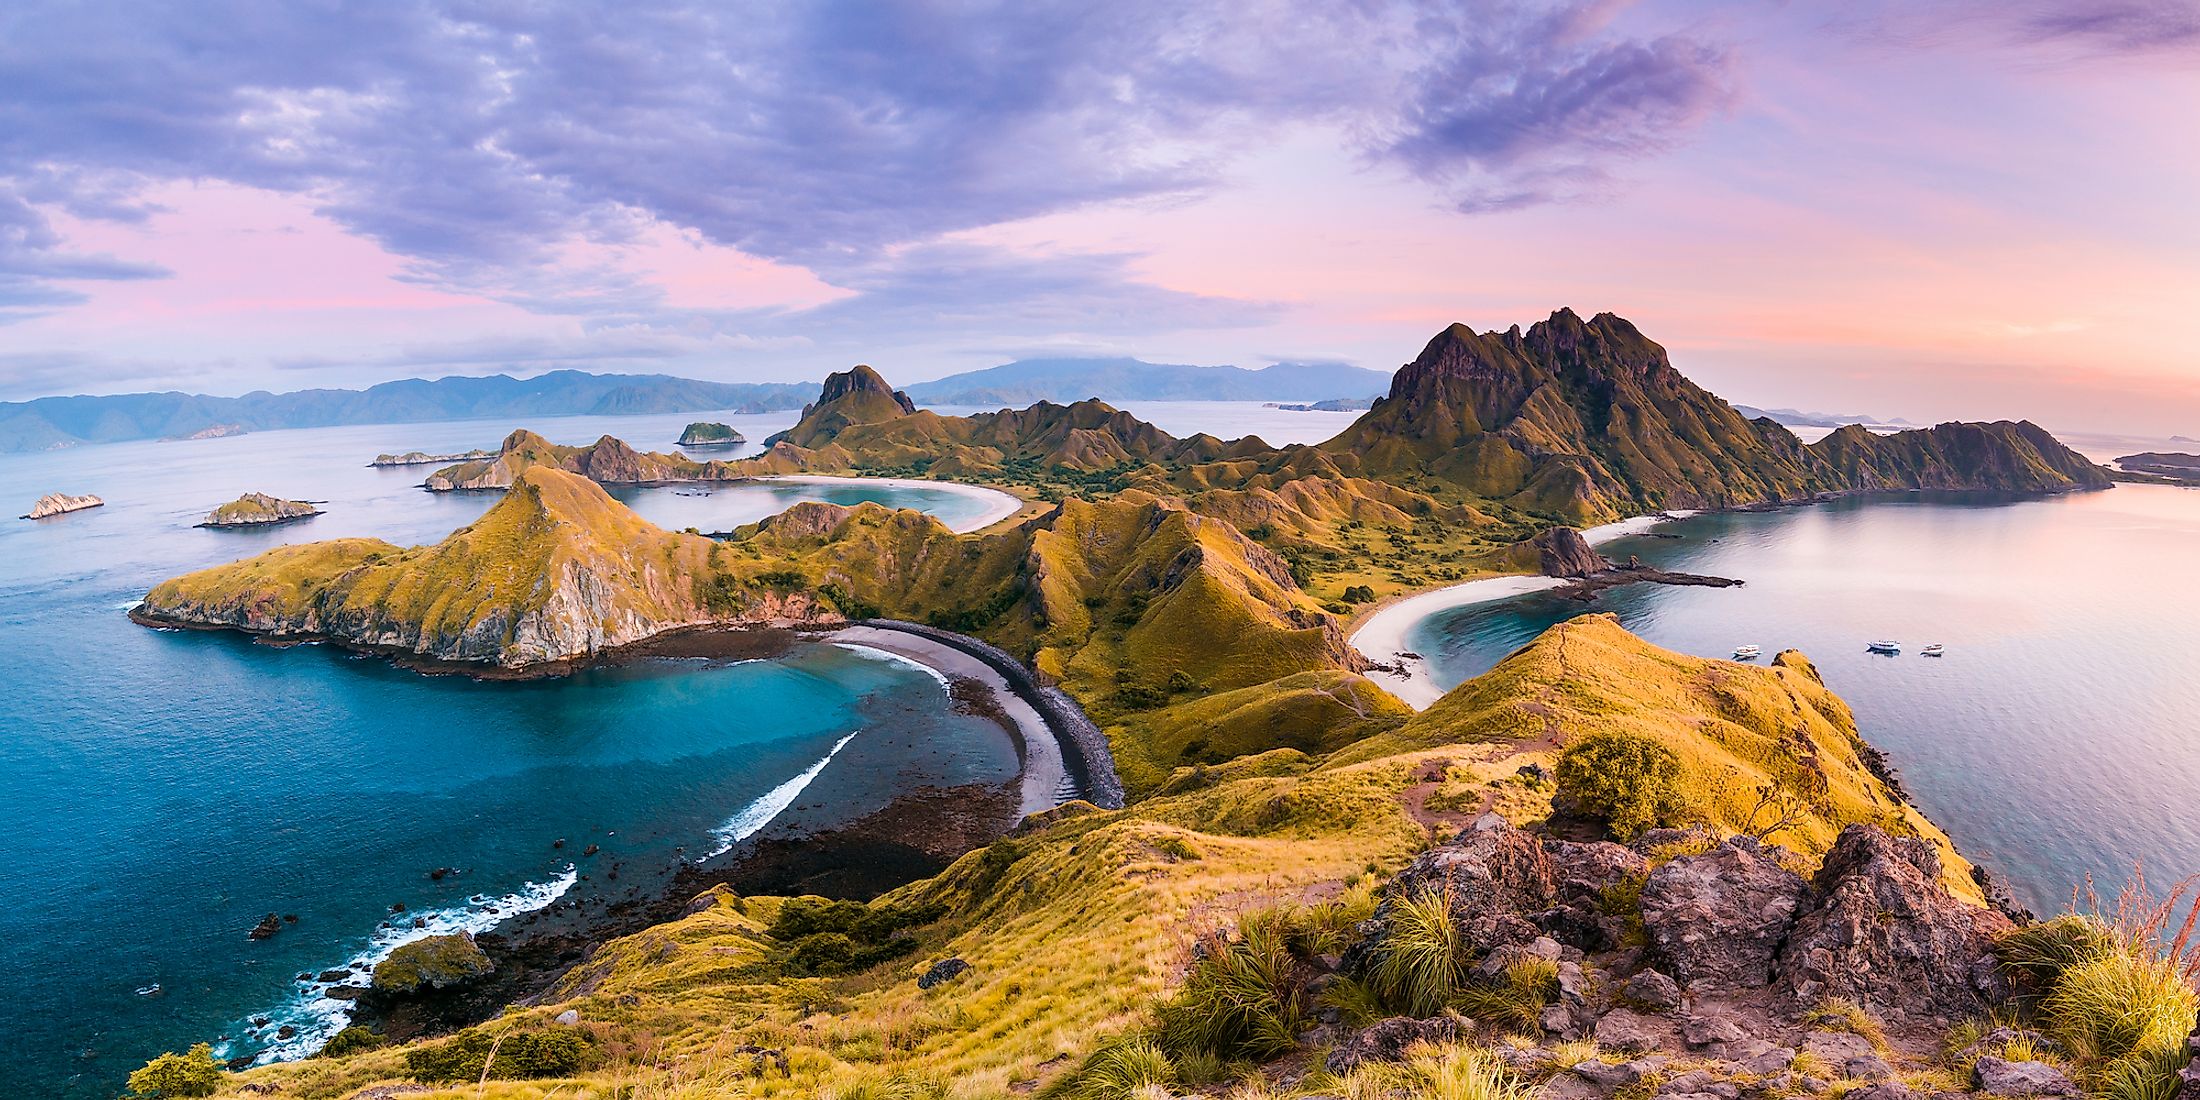 An island in Indonesia, the largest island country in the world.